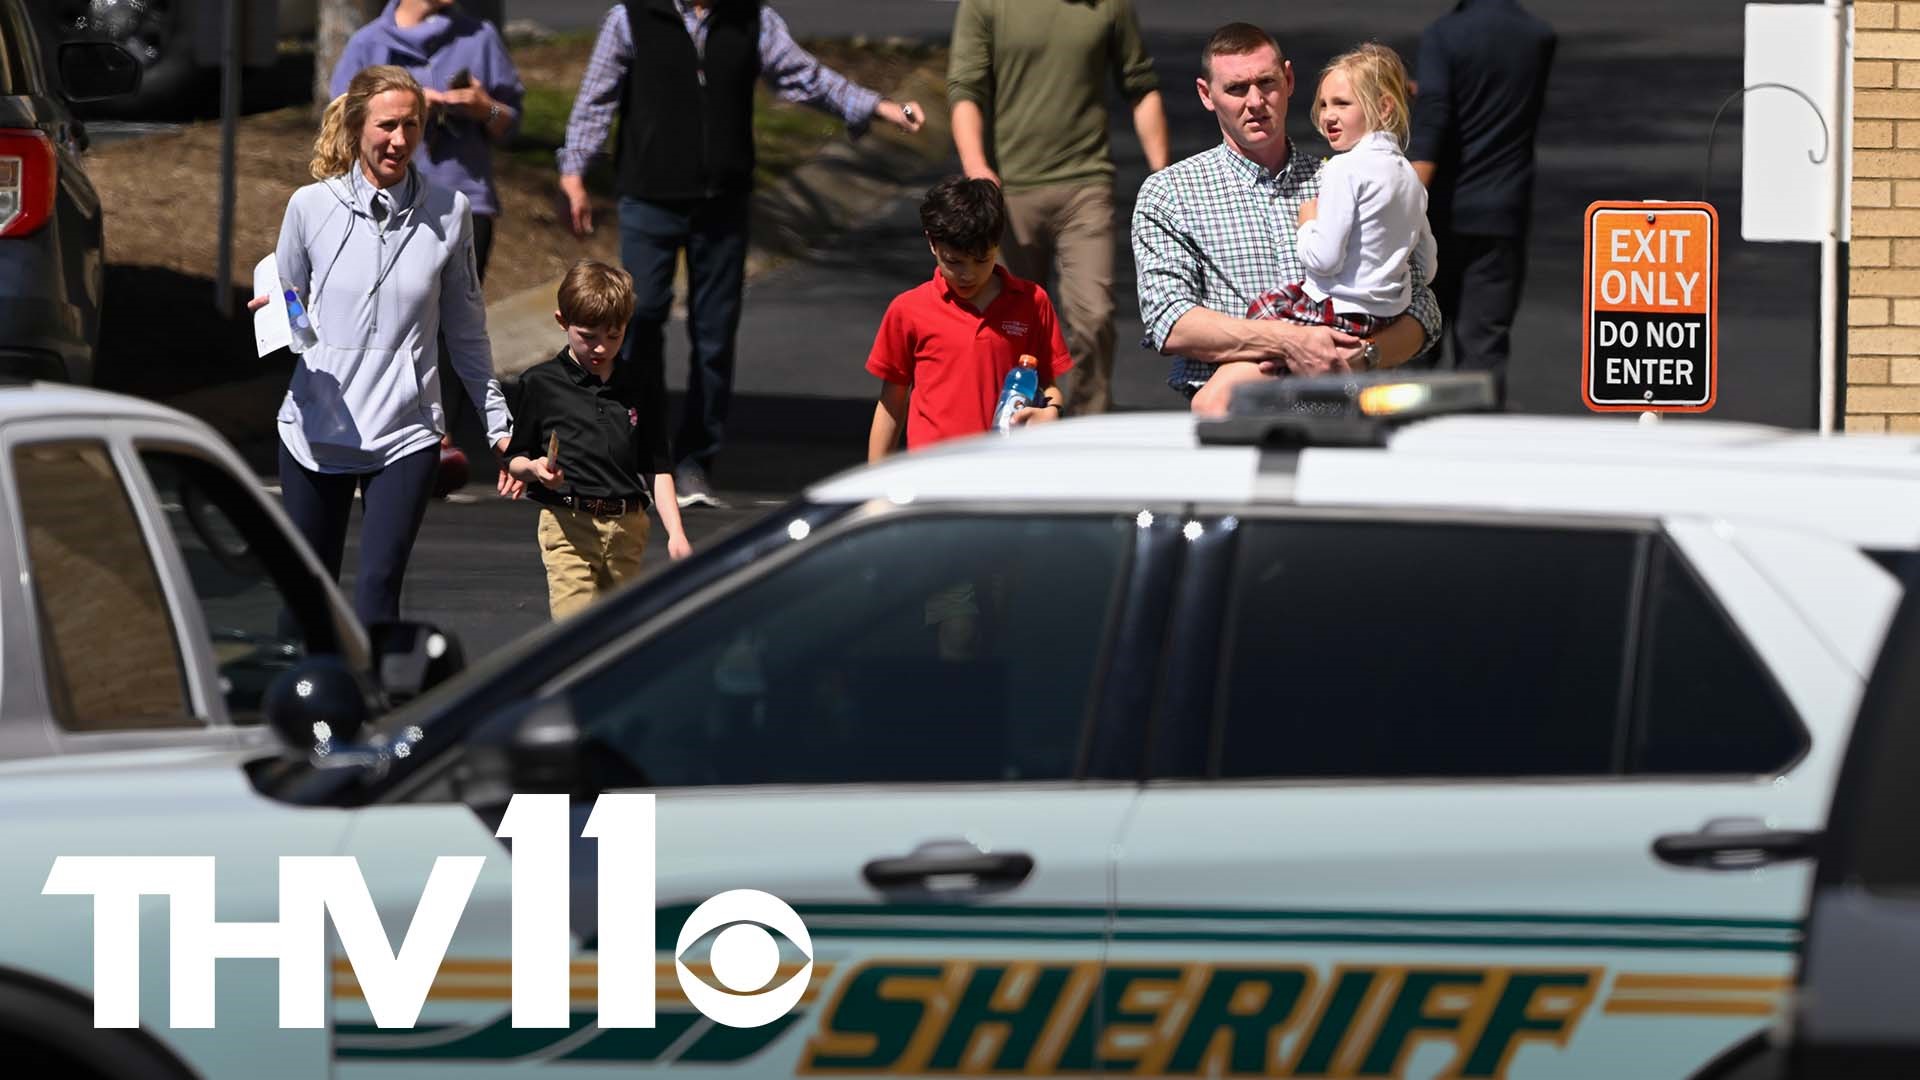 Police said seven total people died, including the suspected 28-year-old female shooter. Three law enforcement officials identified the suspect as Audrey Hale.